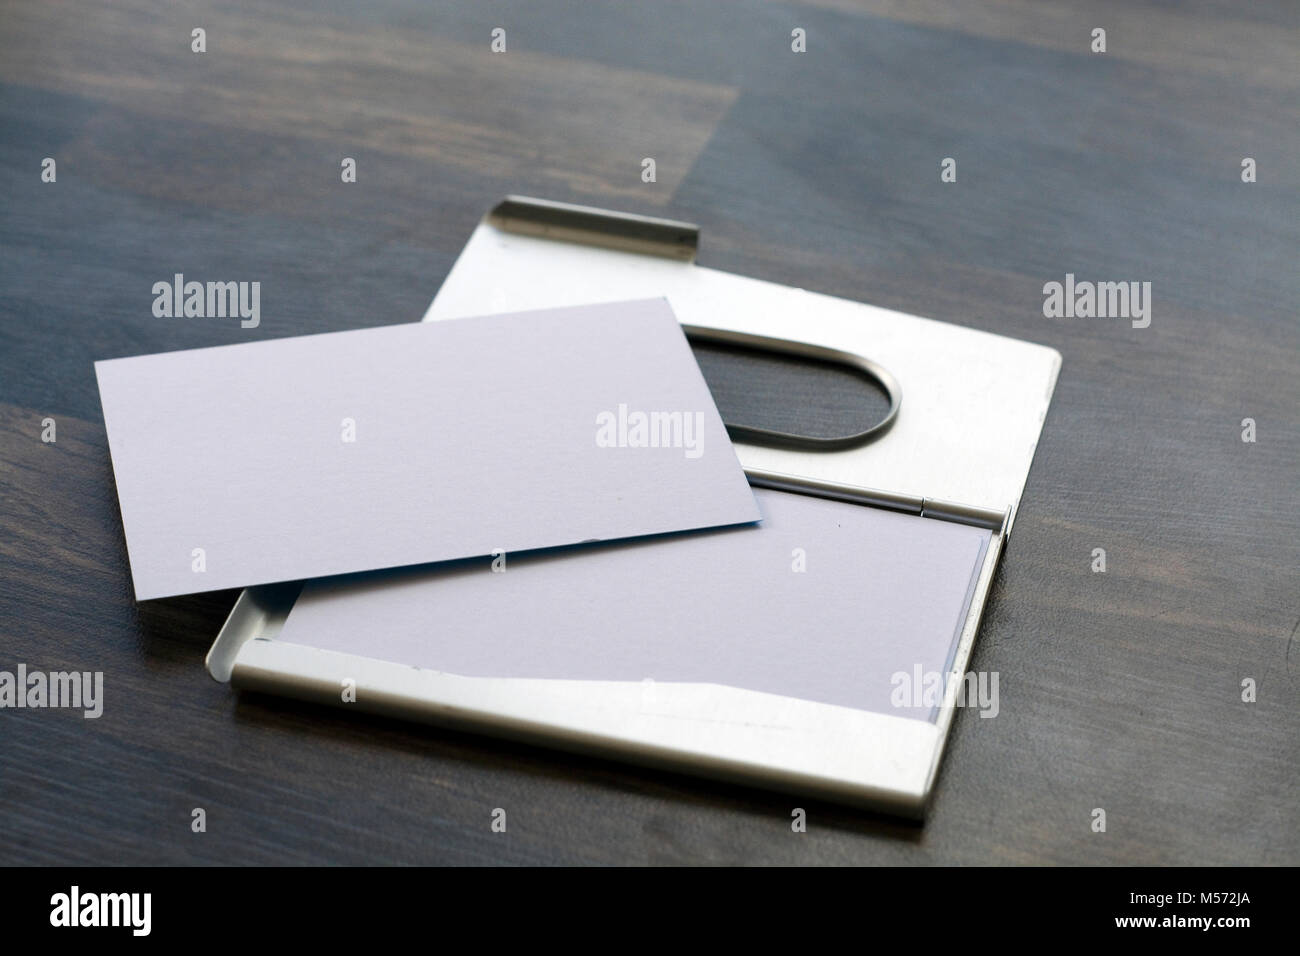 Business card holder with blank business cards Stock Photo